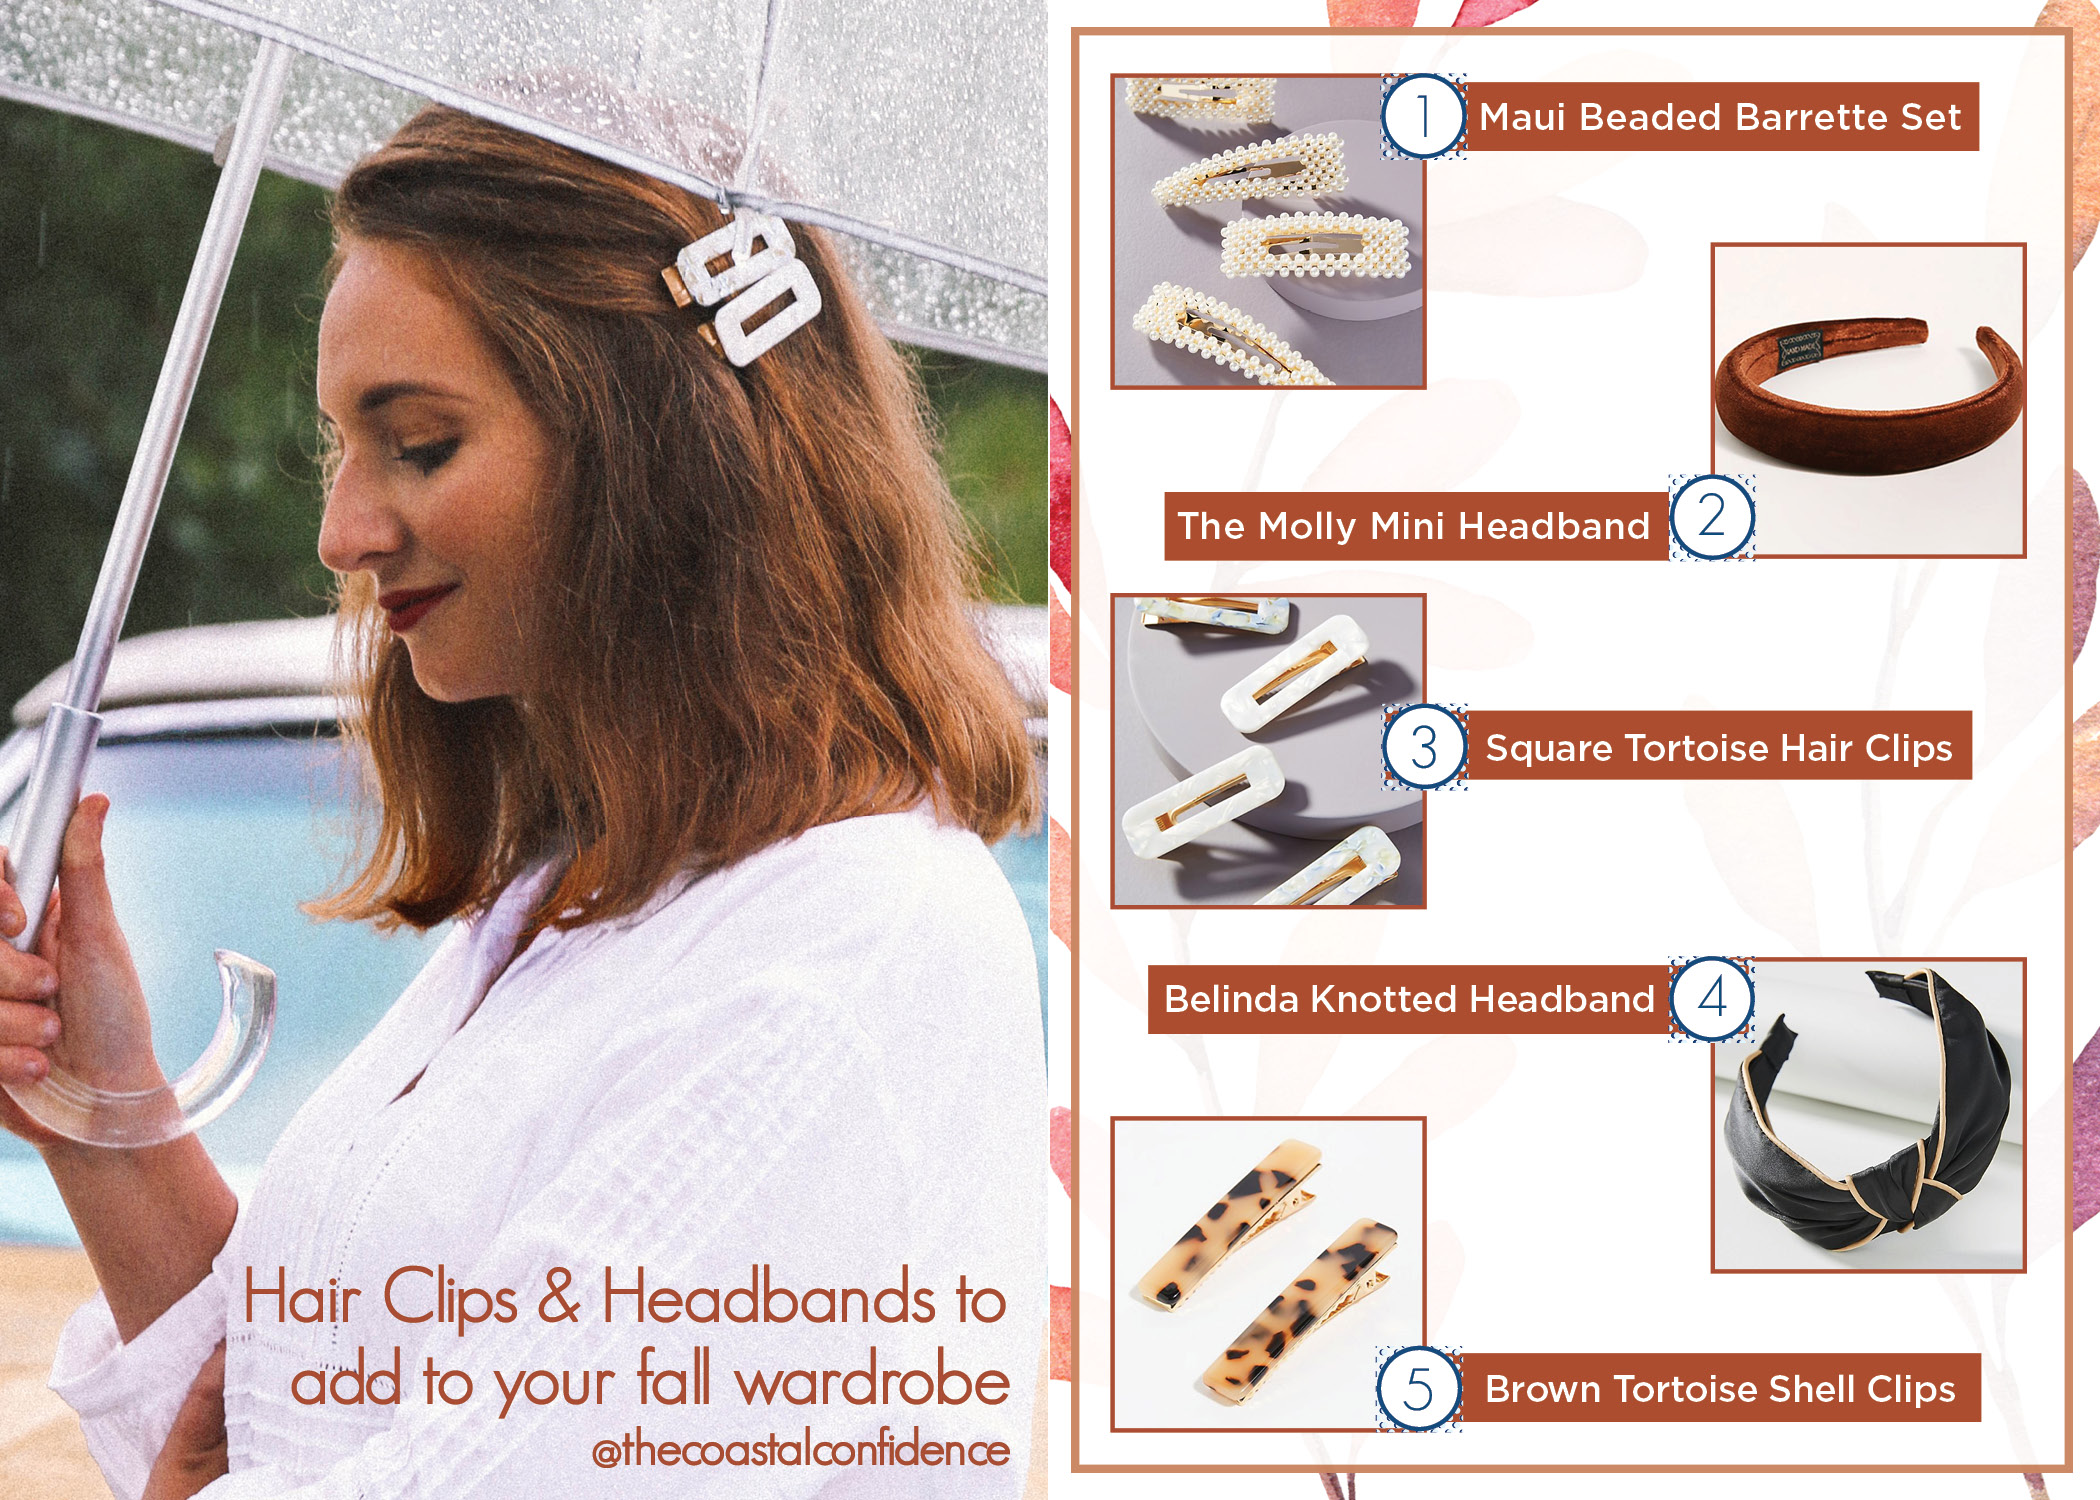 Hair Clips and Headbands To Add To Your Wardrobe This Fall The Coastal Confidence